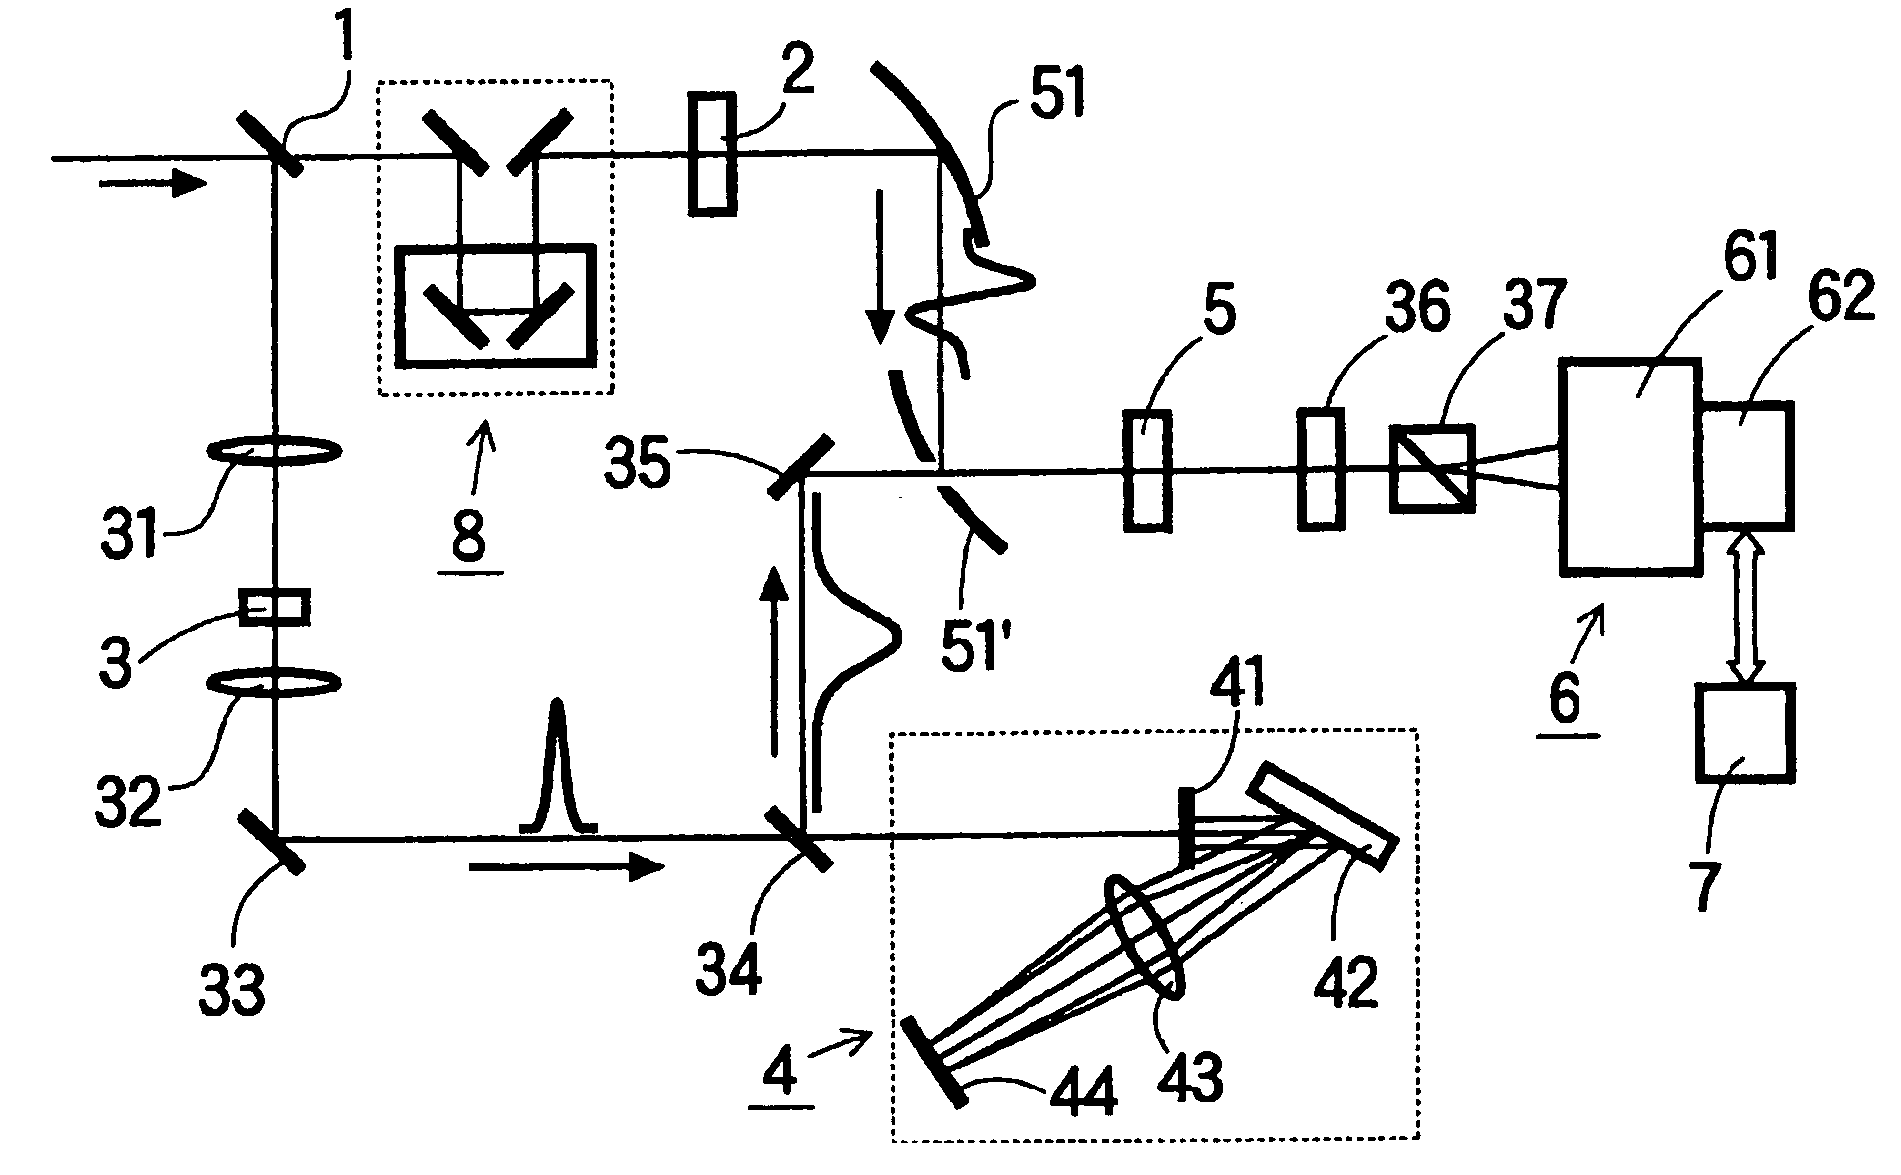 Multi-channeled measuring method and apparatus for measuring spectrum of terahertz pulse